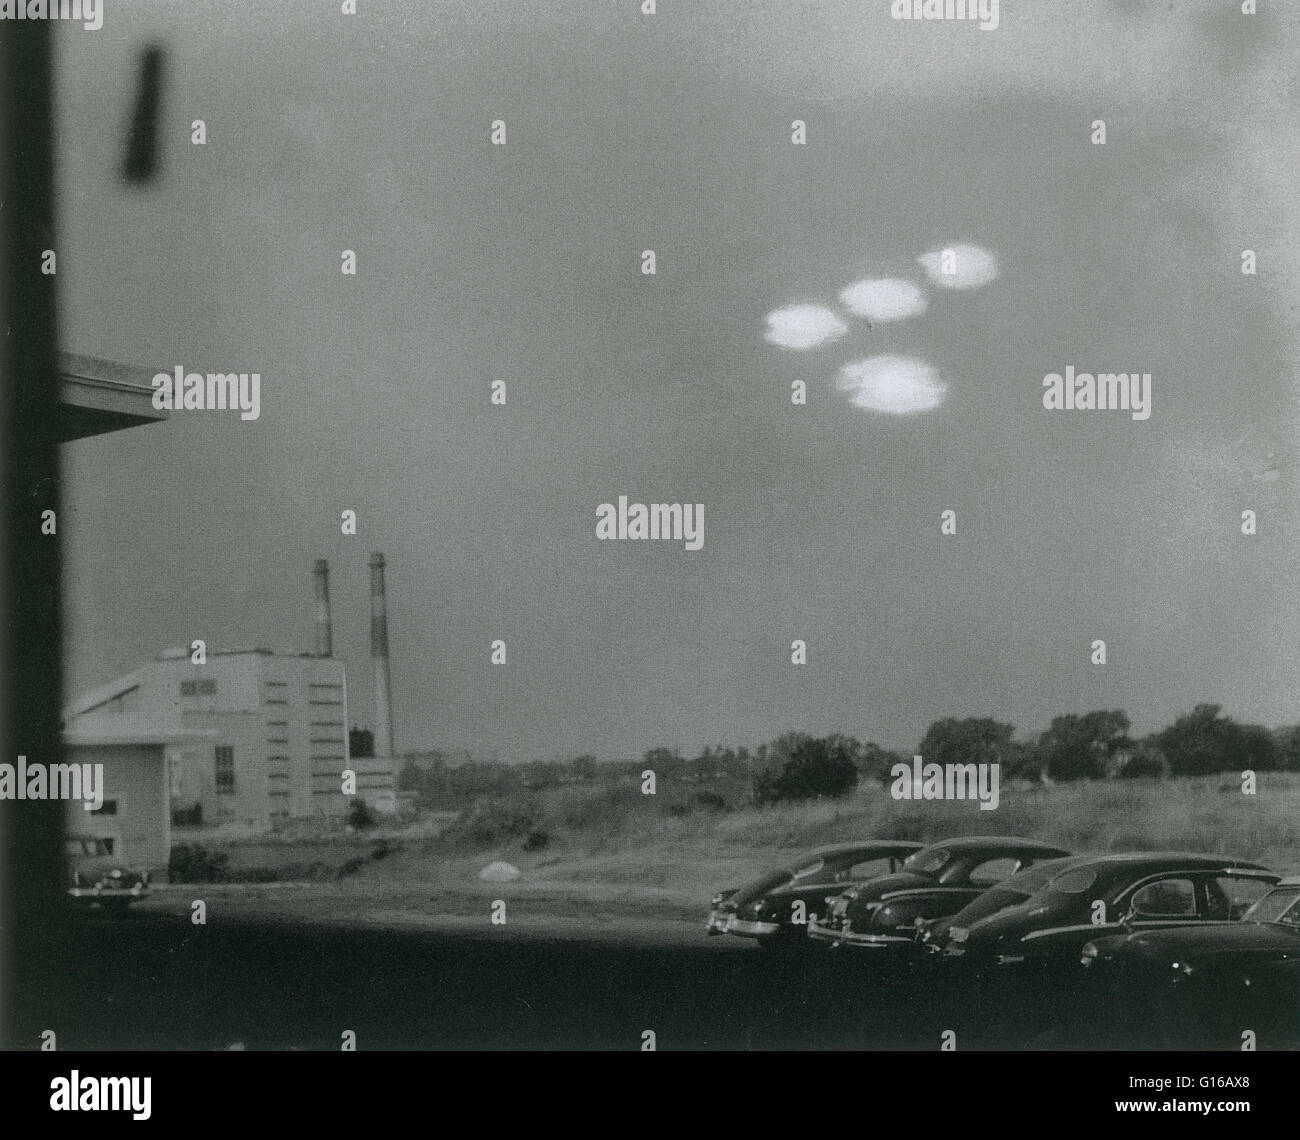 On July 16, 1952 at 09:35 AM Coast Guard seaman Shell Alpert, took this picture of four roughly elliptical blobs of light in formation through the window of his photographic laboratory. The objects were also witnessed by Coastguardsman Thomas Flaherty. Bo Stock Photo